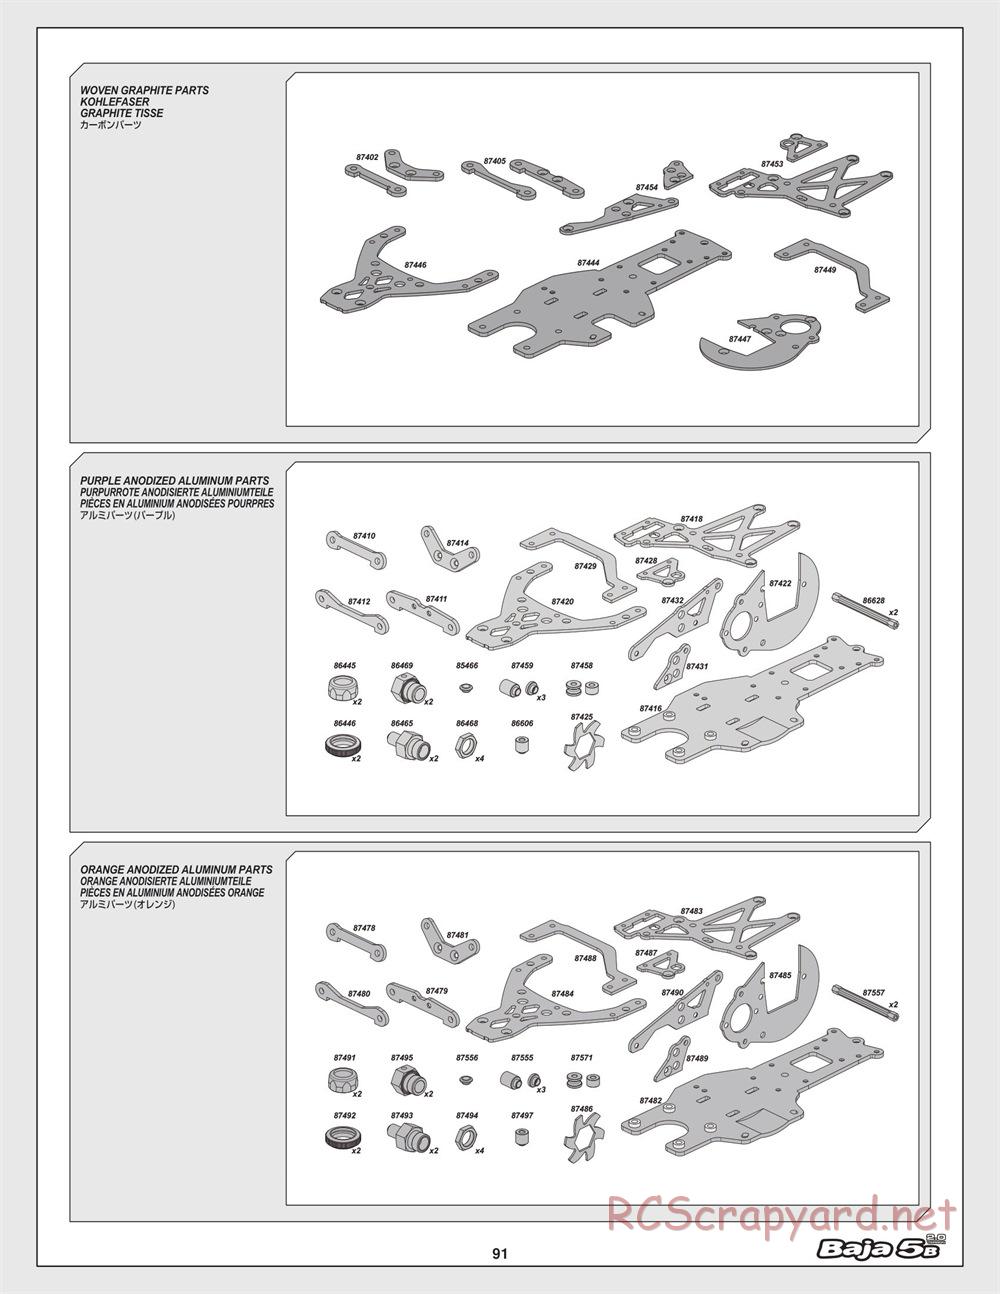 HPI - Baja 5B 2.0 - Exploded View - Page 91